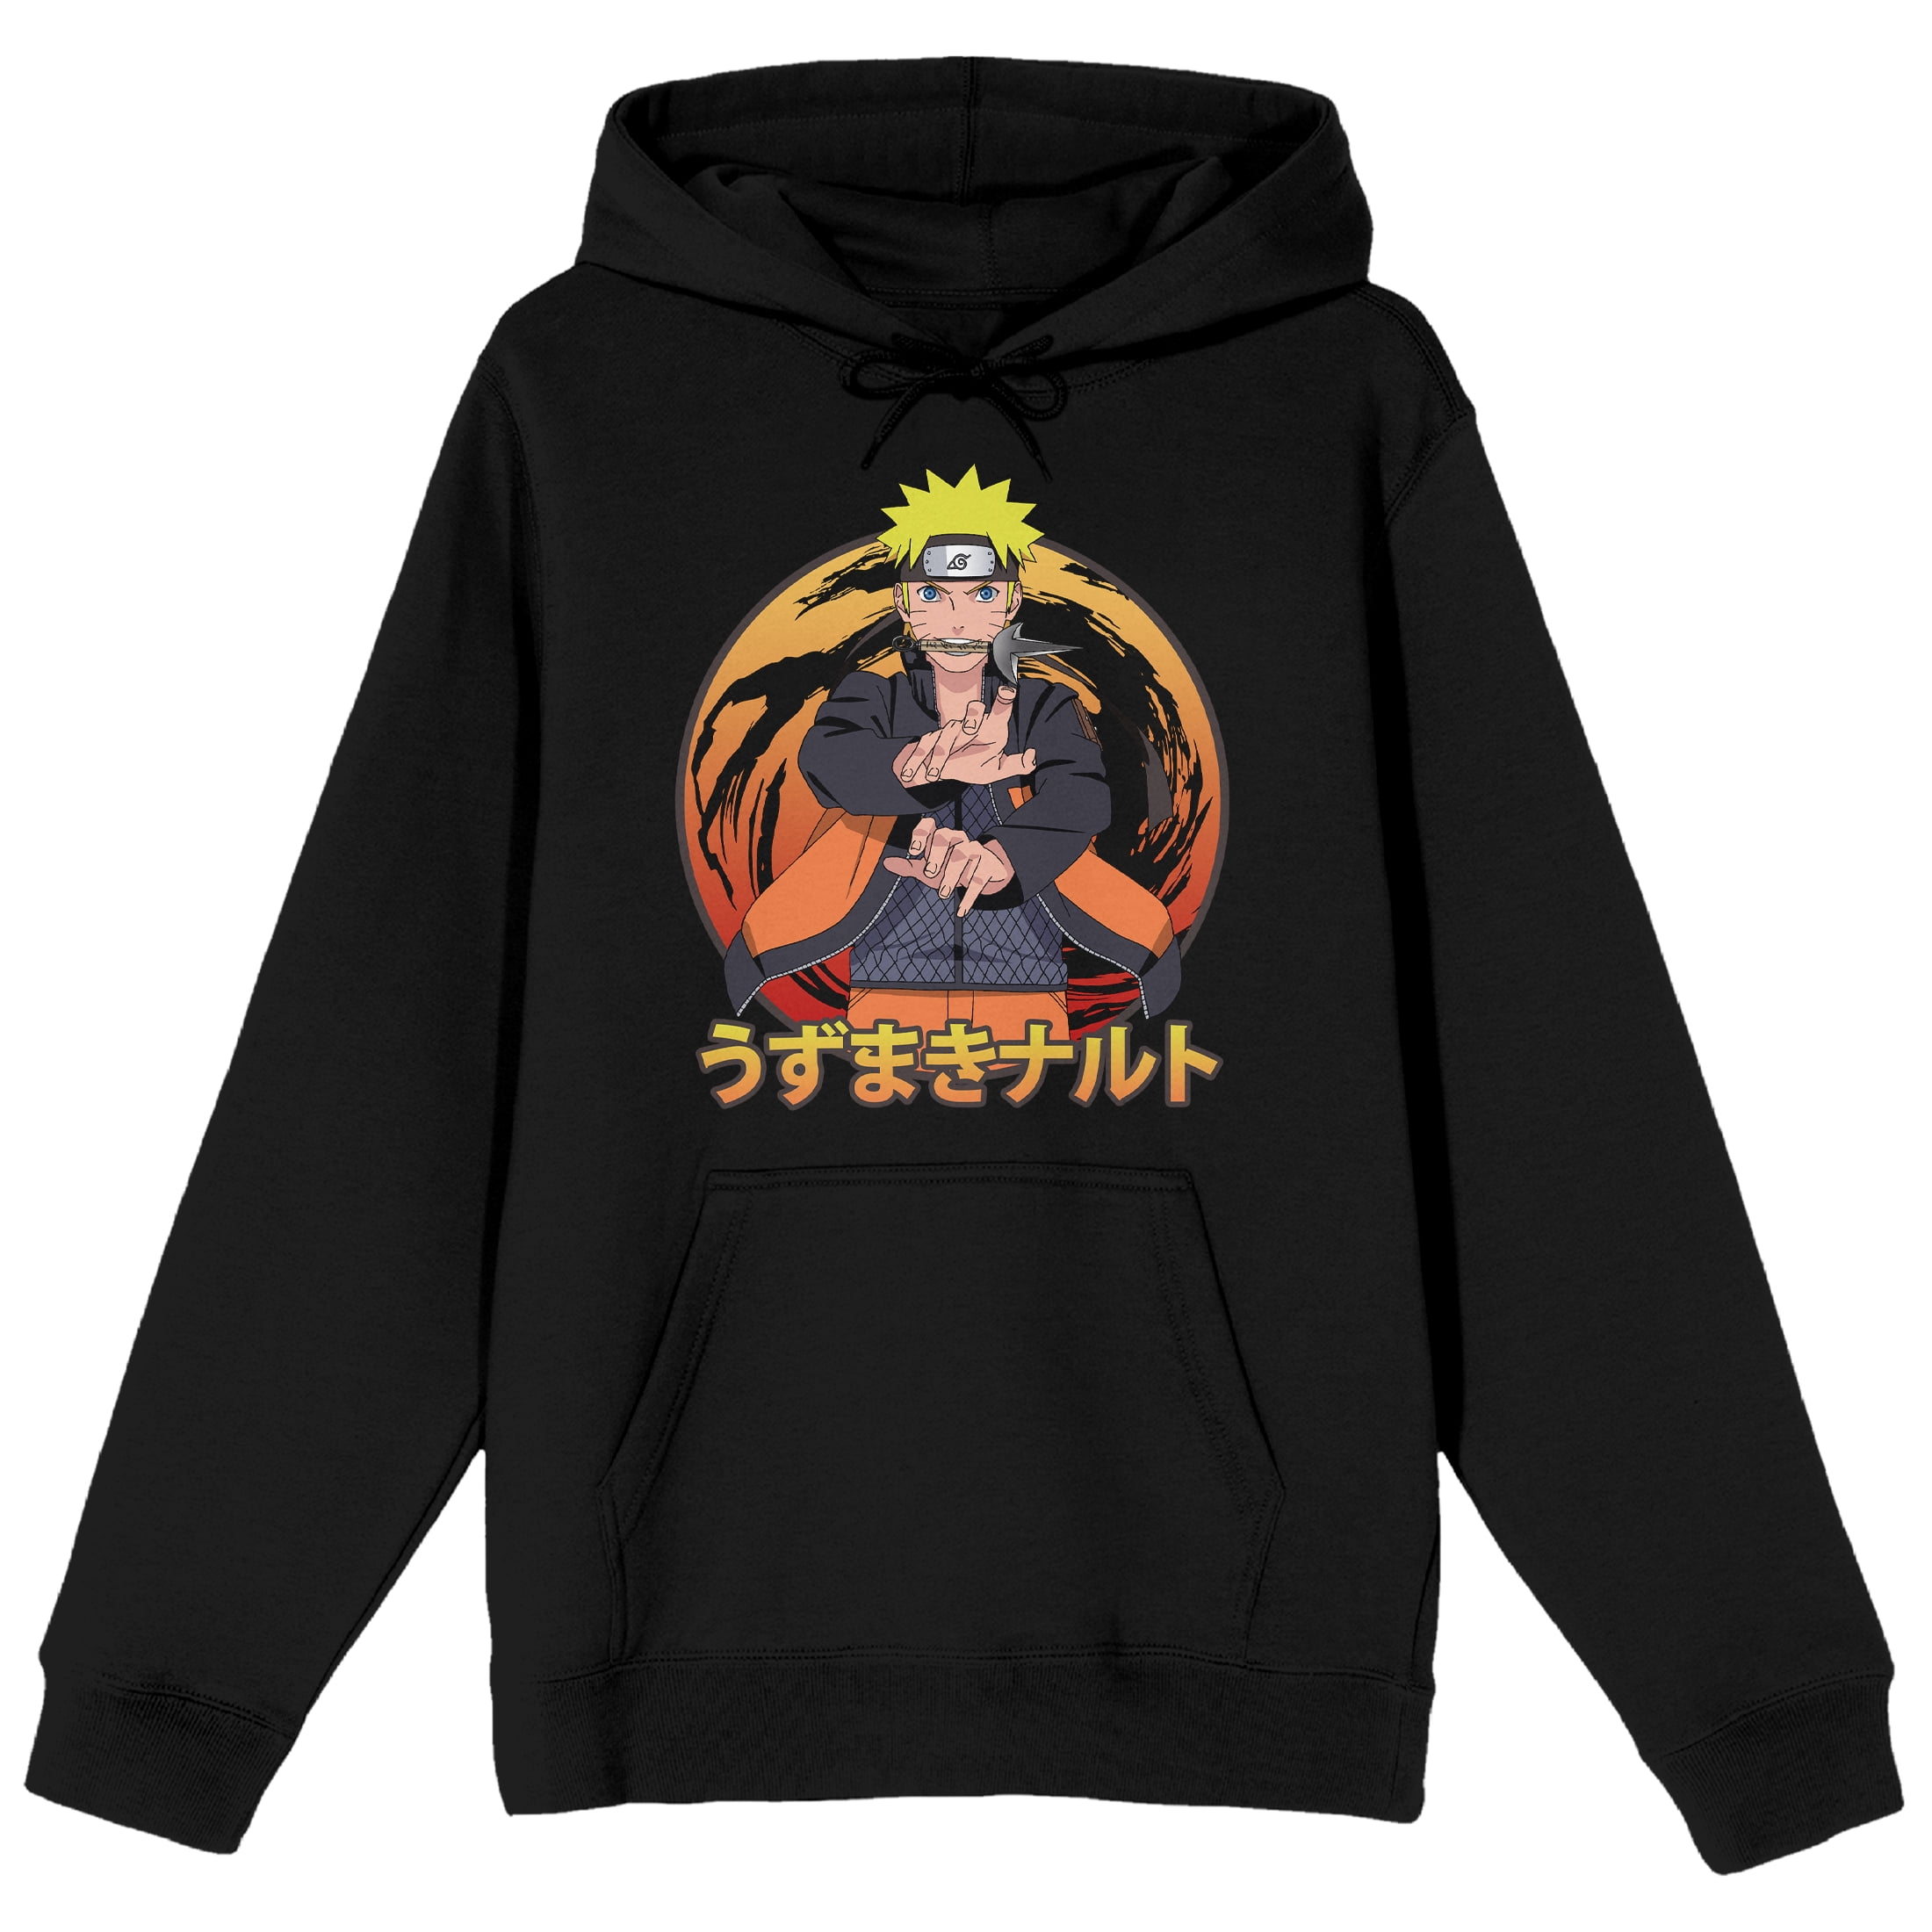 Naruto Jounin Hoodie available in S , M and L Size. #Naruto